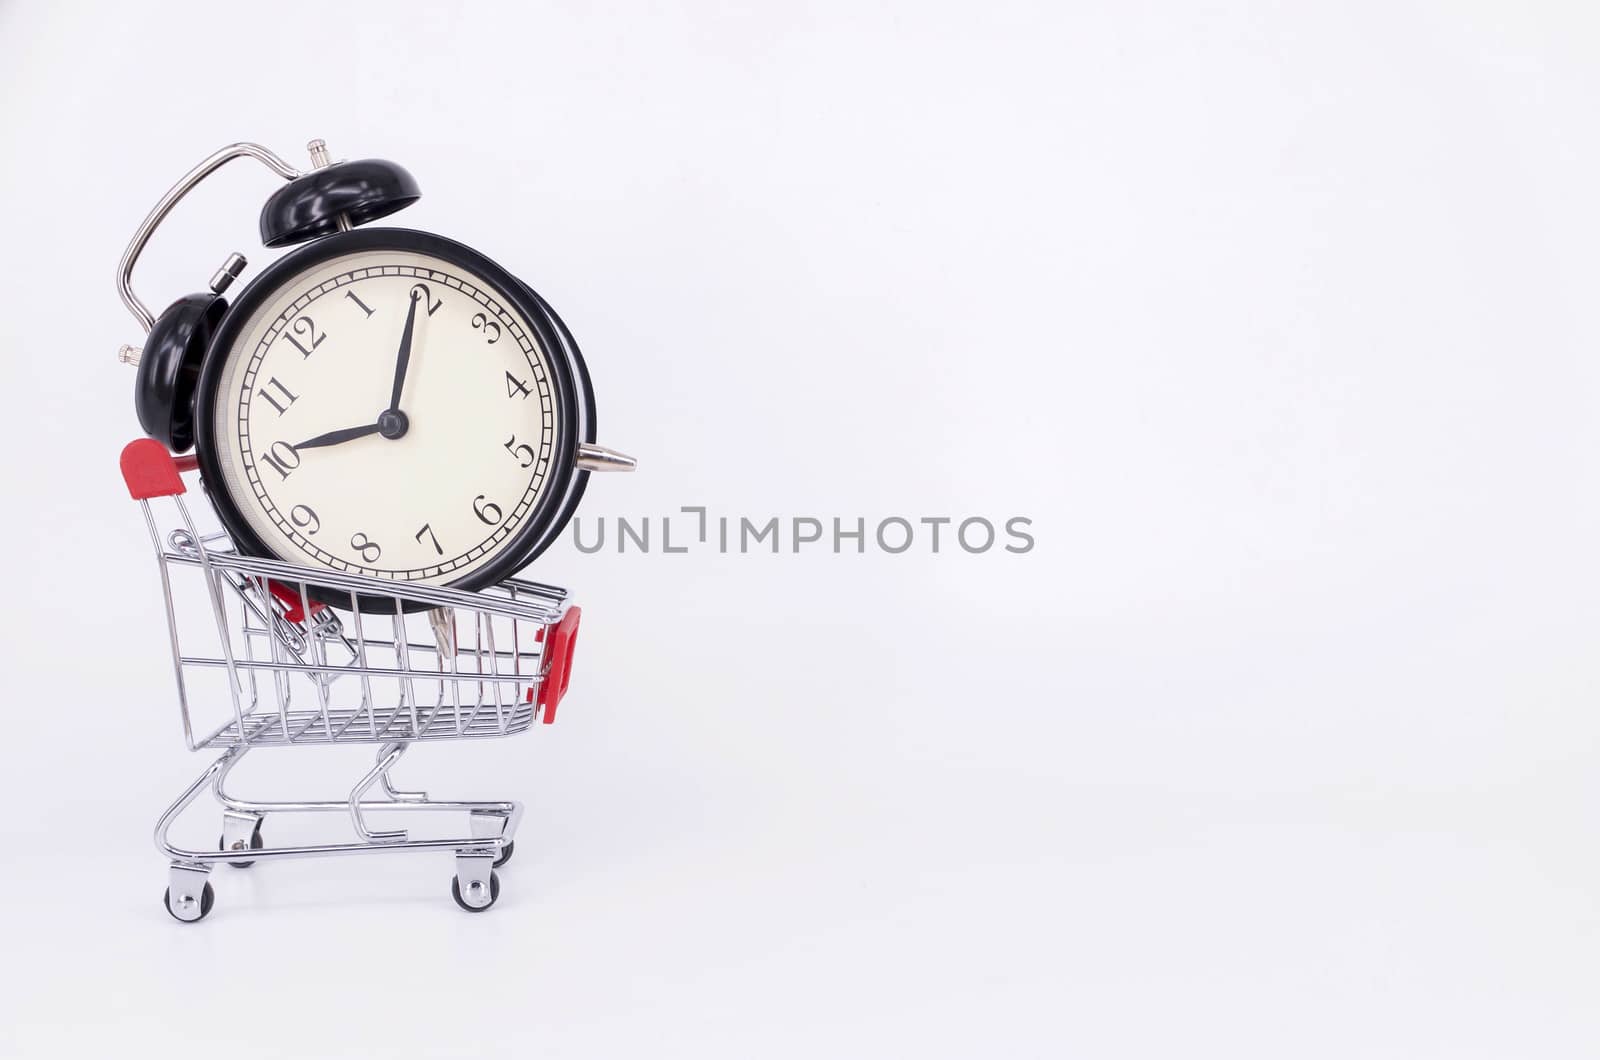 Shopping cart and classic alarm clock on white background. Sale time buy mall market shop consumer concept. Selective focus.